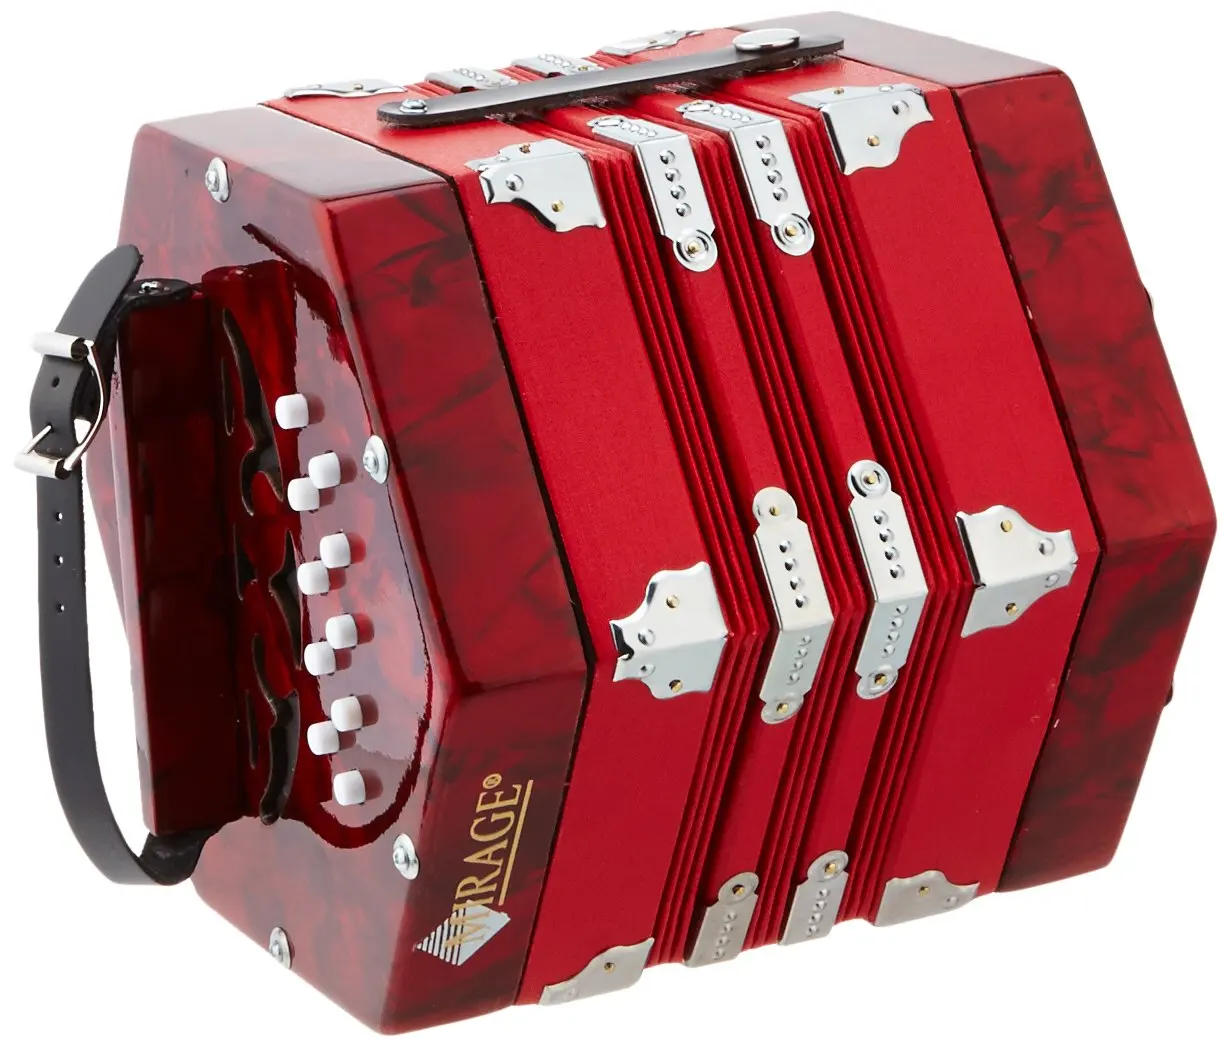 Cheap Concertina Sale, find Concertina Sale deals on line at